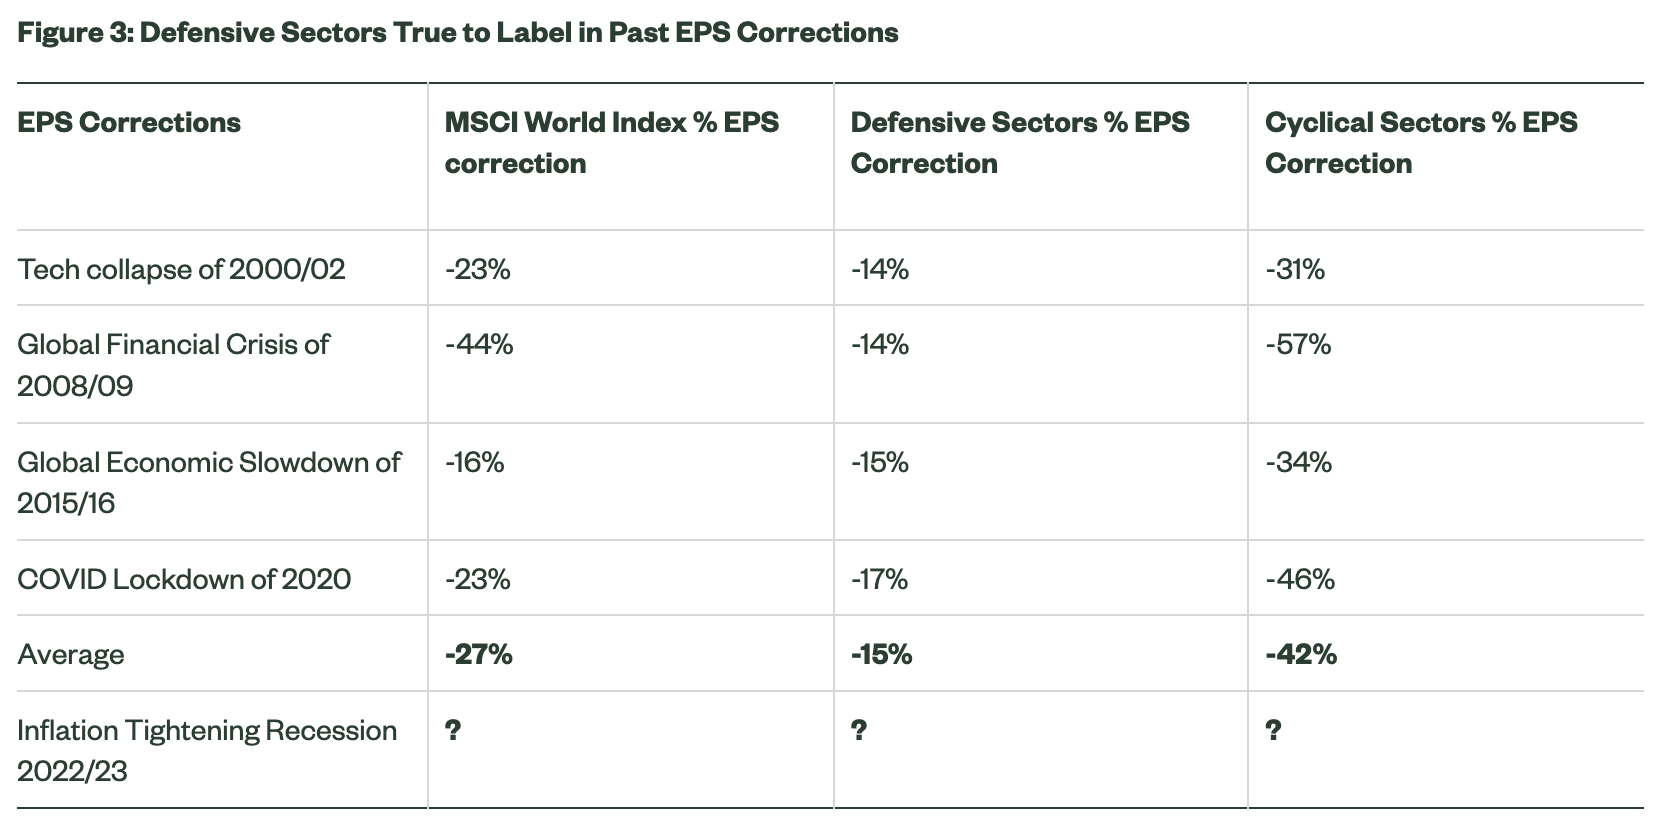 Source: State Street Global Advisors, Factset, as at 5 August 2022. Earnings corrections are defined as corrections of more than 15% corrections in earnings per share estimates for the next 12 months. Defensive sectors are Heathcare, Staples, Utilities and Communications. Cyclical sectors are Discretionary, Industrials, Technology, Financials, Materials and Energy.